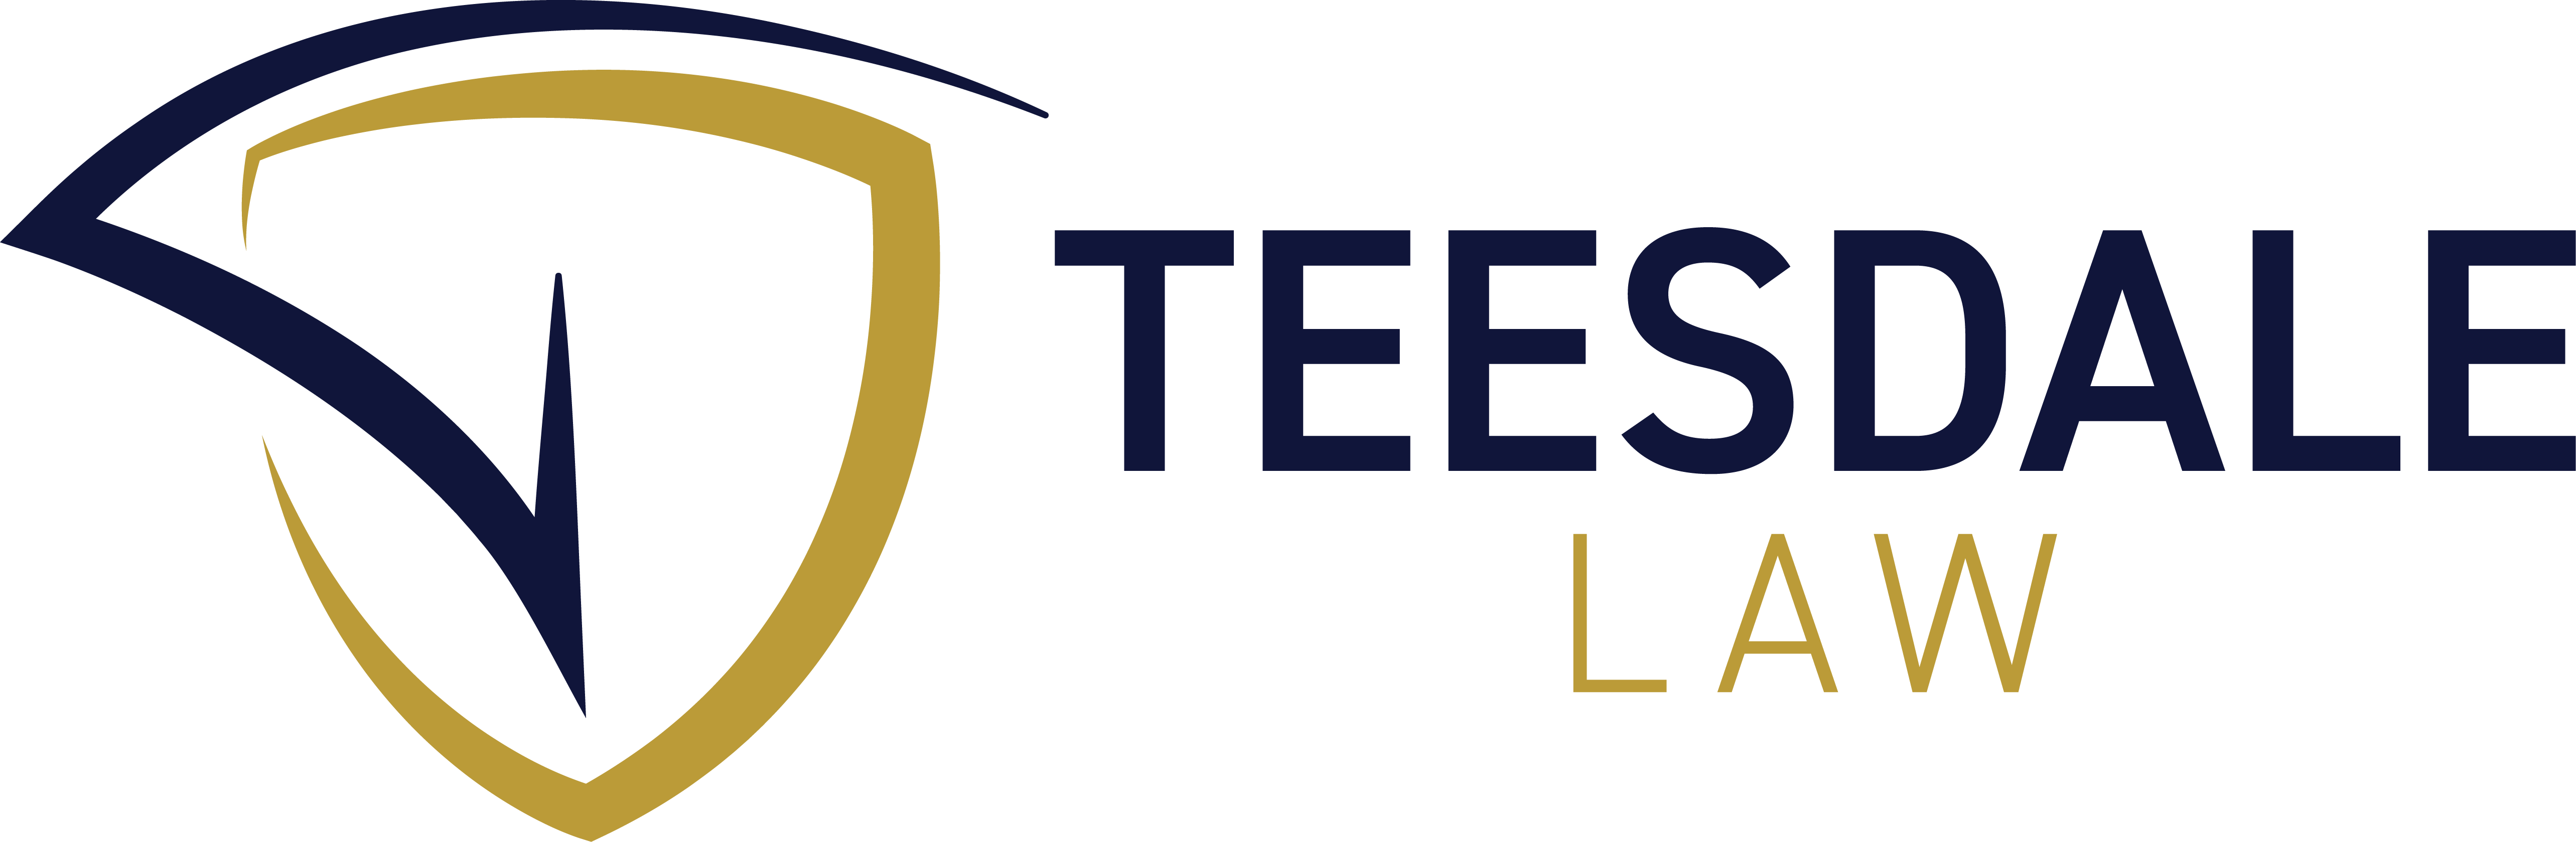 Teesdale Law